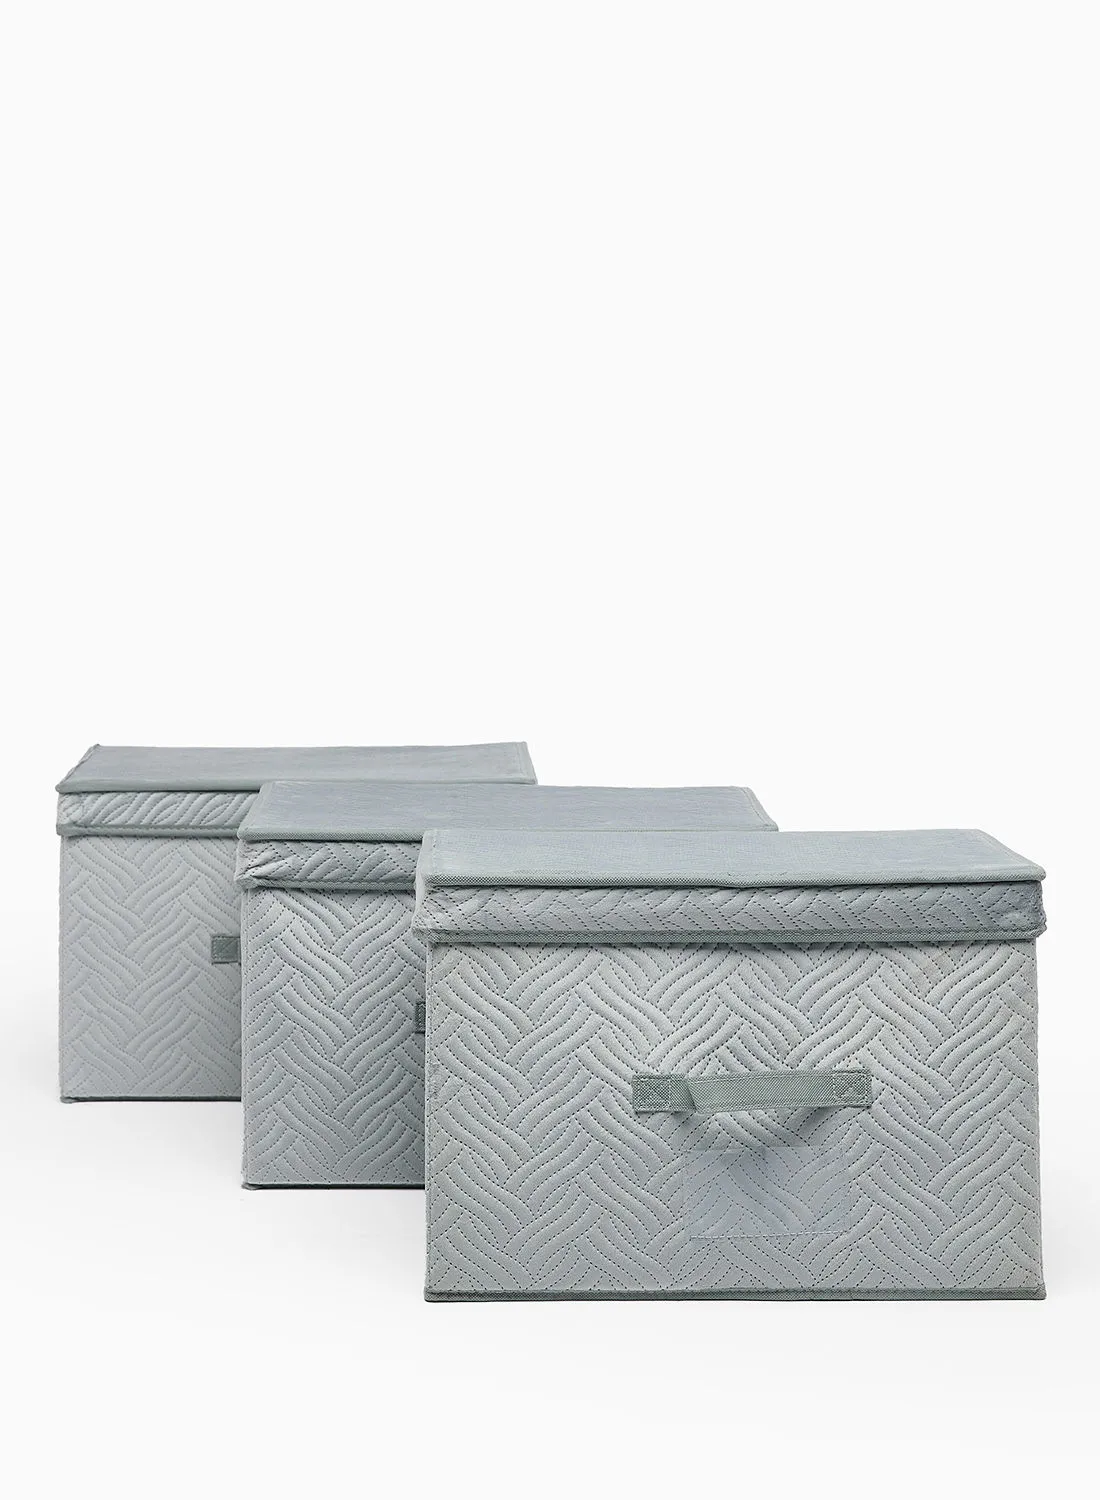 Amal 3 Pack Storage Organiser With Side Handles And Top Zipper Lid, Easy To Collapse From The Top, Handy For Closet And Dresser Organisation Light Grey 39X27X26cm